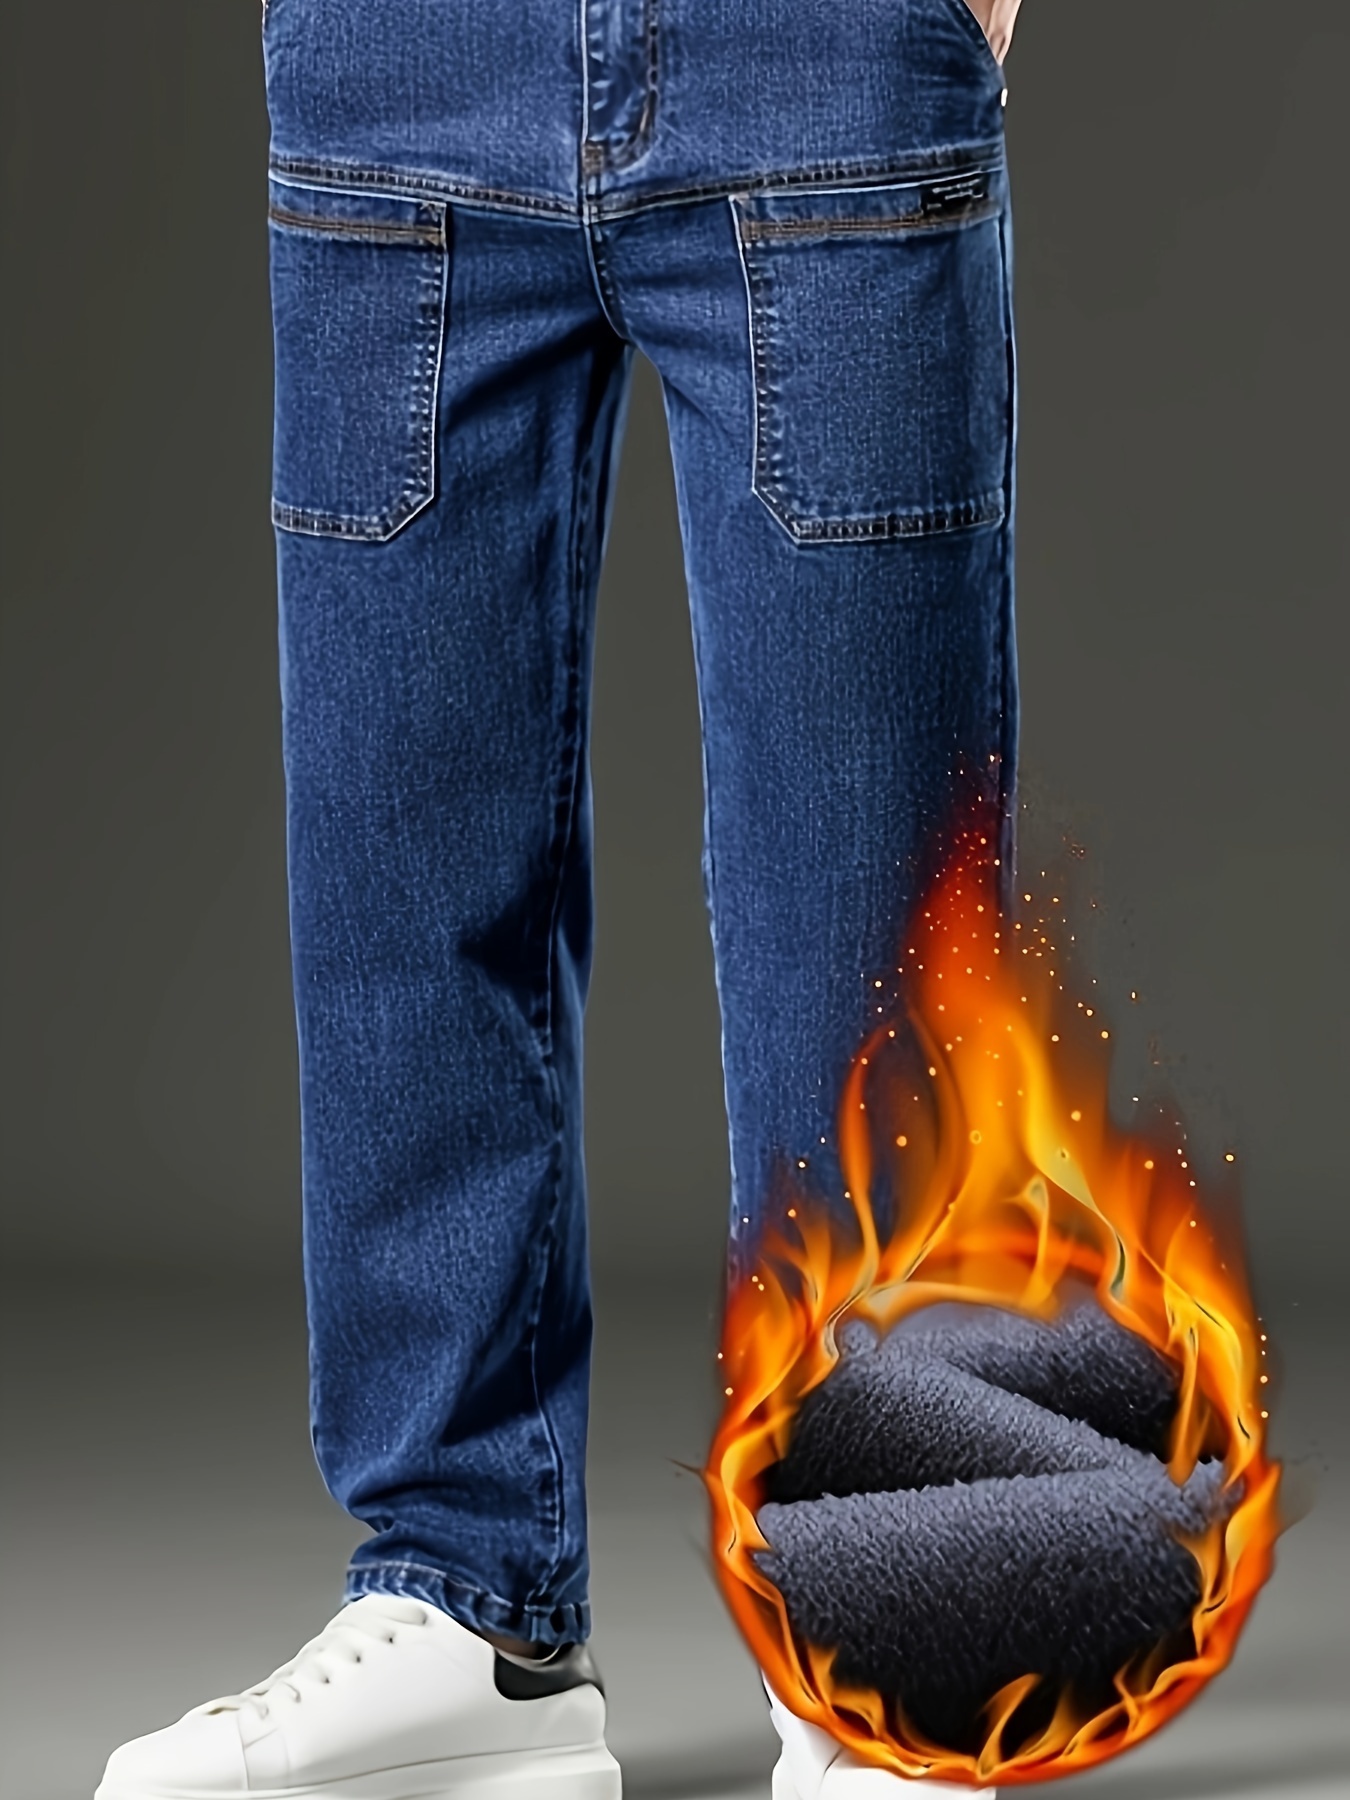 Men's Trendy Denim Jeans, Casual Straight Leg Loose Pants For Outdoor